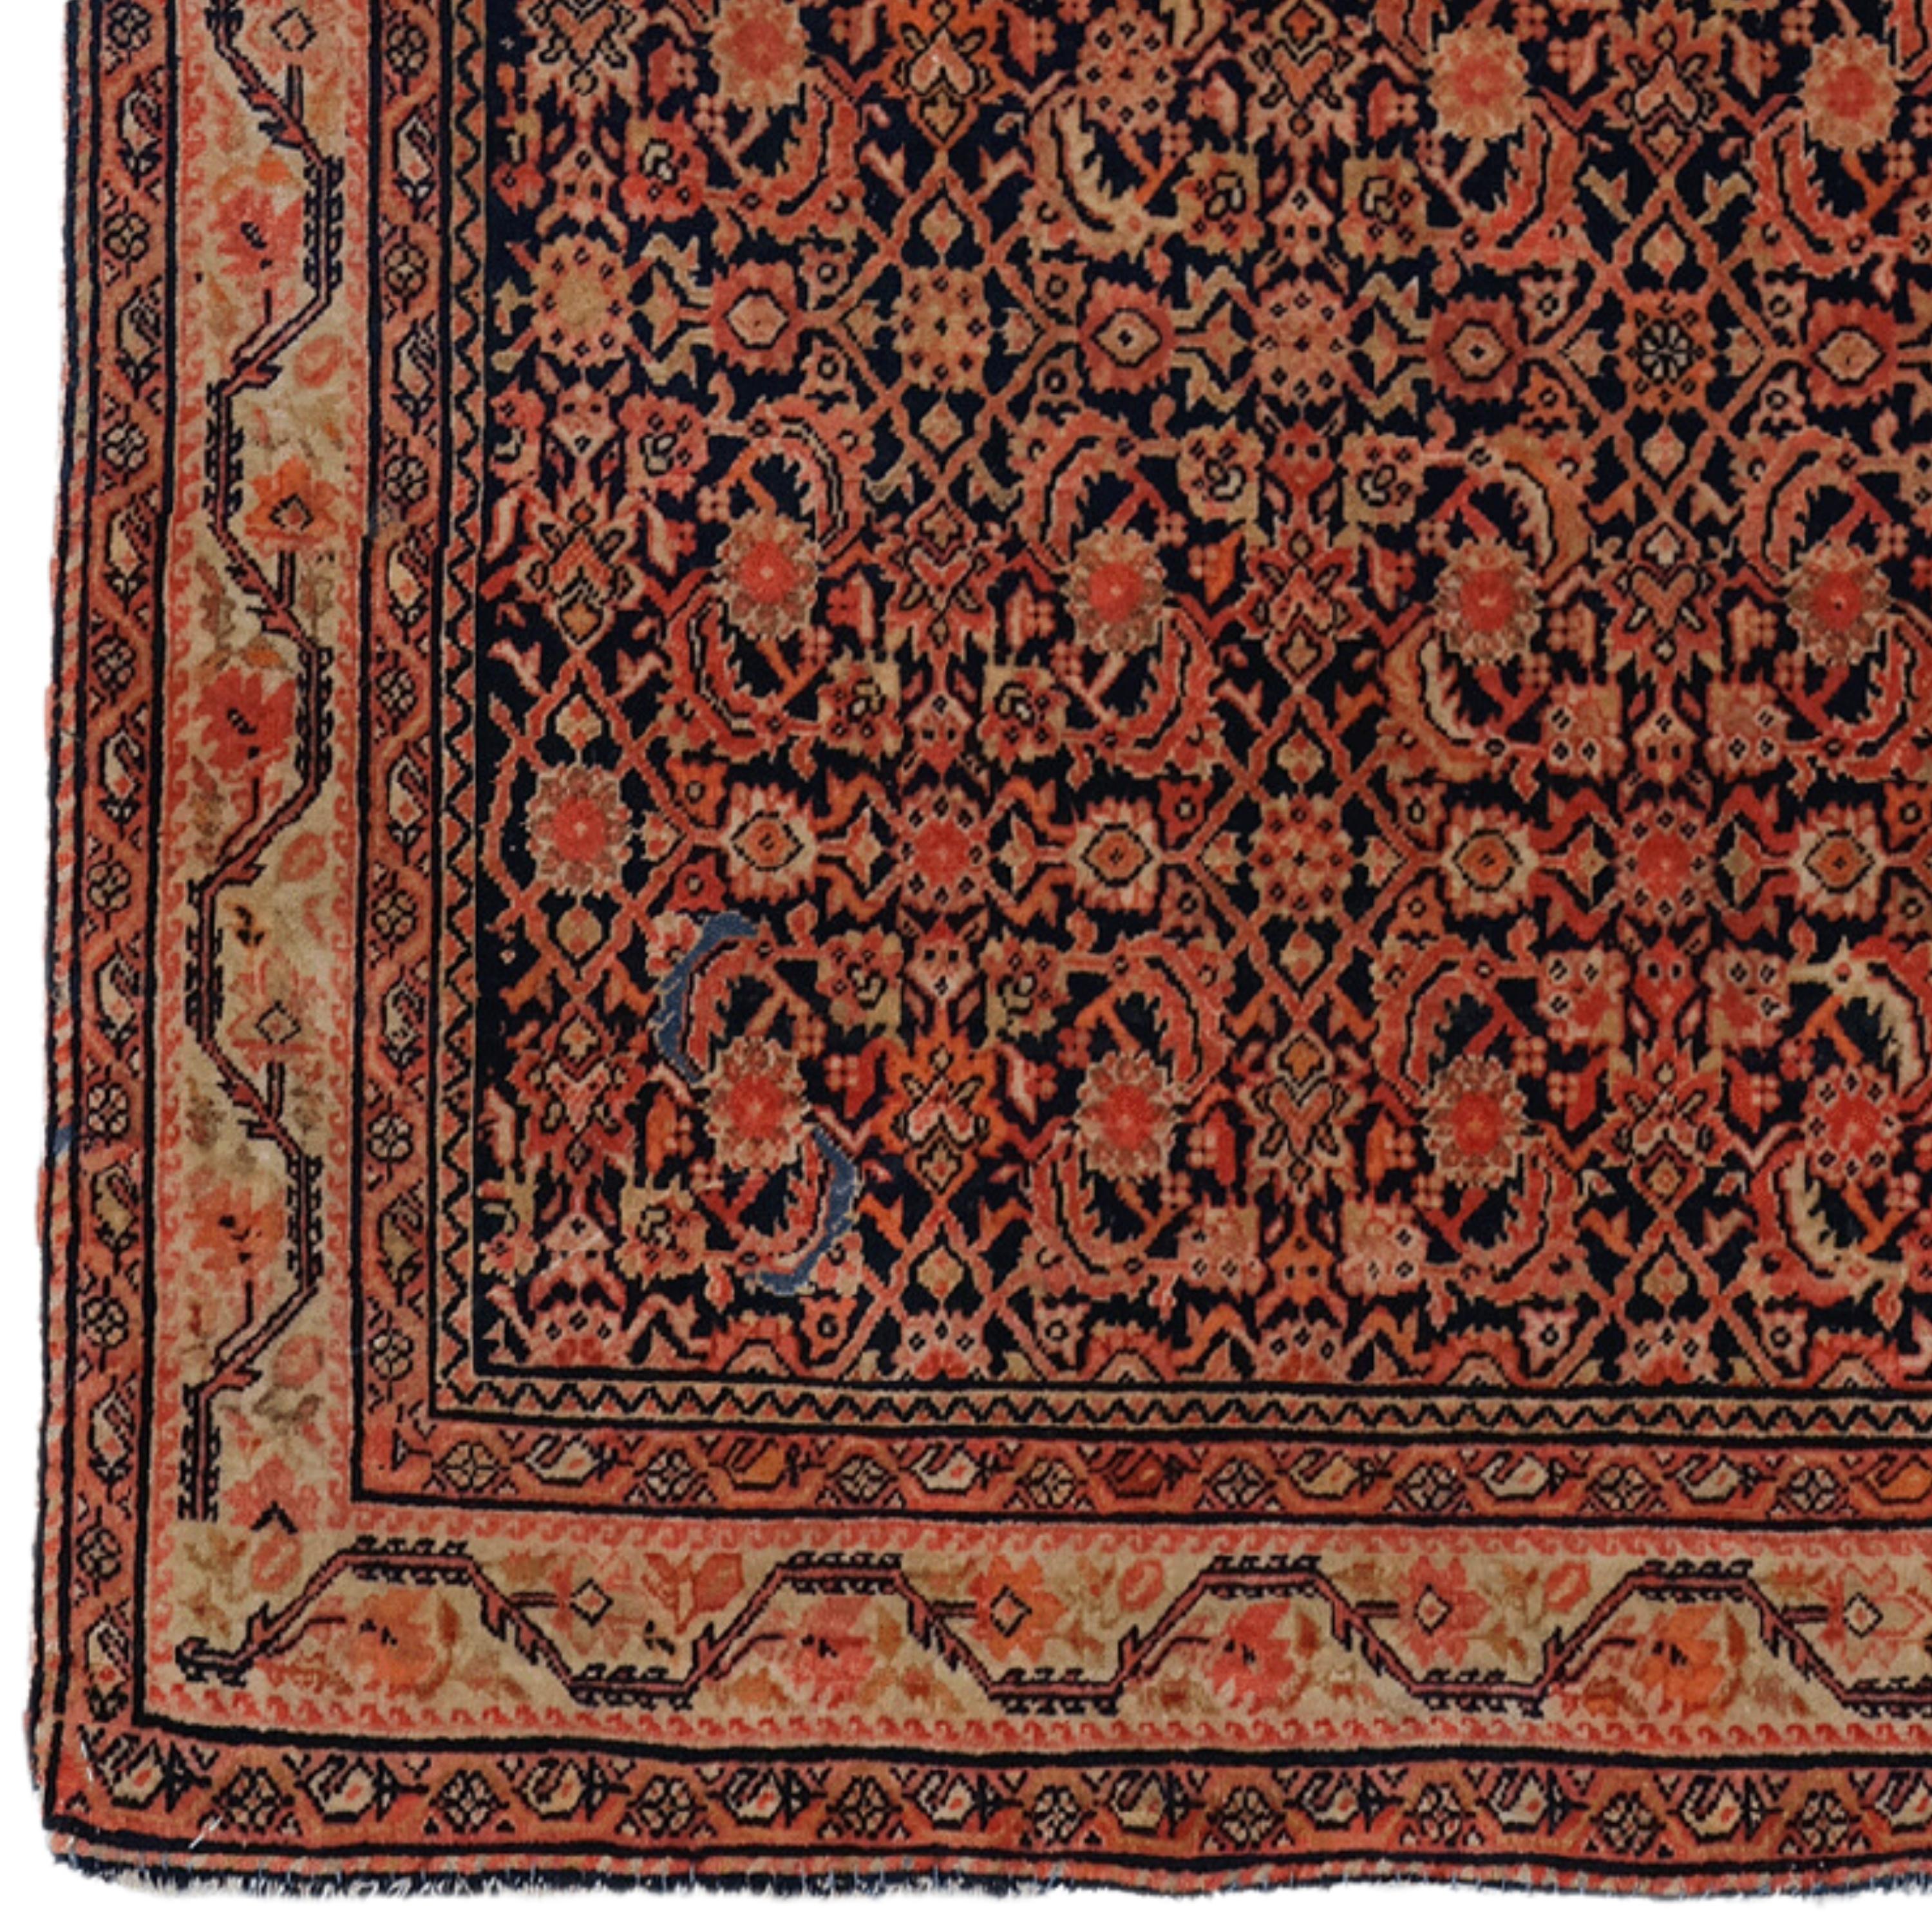 This elegant 19th-century Feraghan carpet is an example of the most exquisite craftsmanship of its period. It adds nobility to any space with its rich history and sophisticated design. Vibrant red and golden motifs embroidered on a dark blue